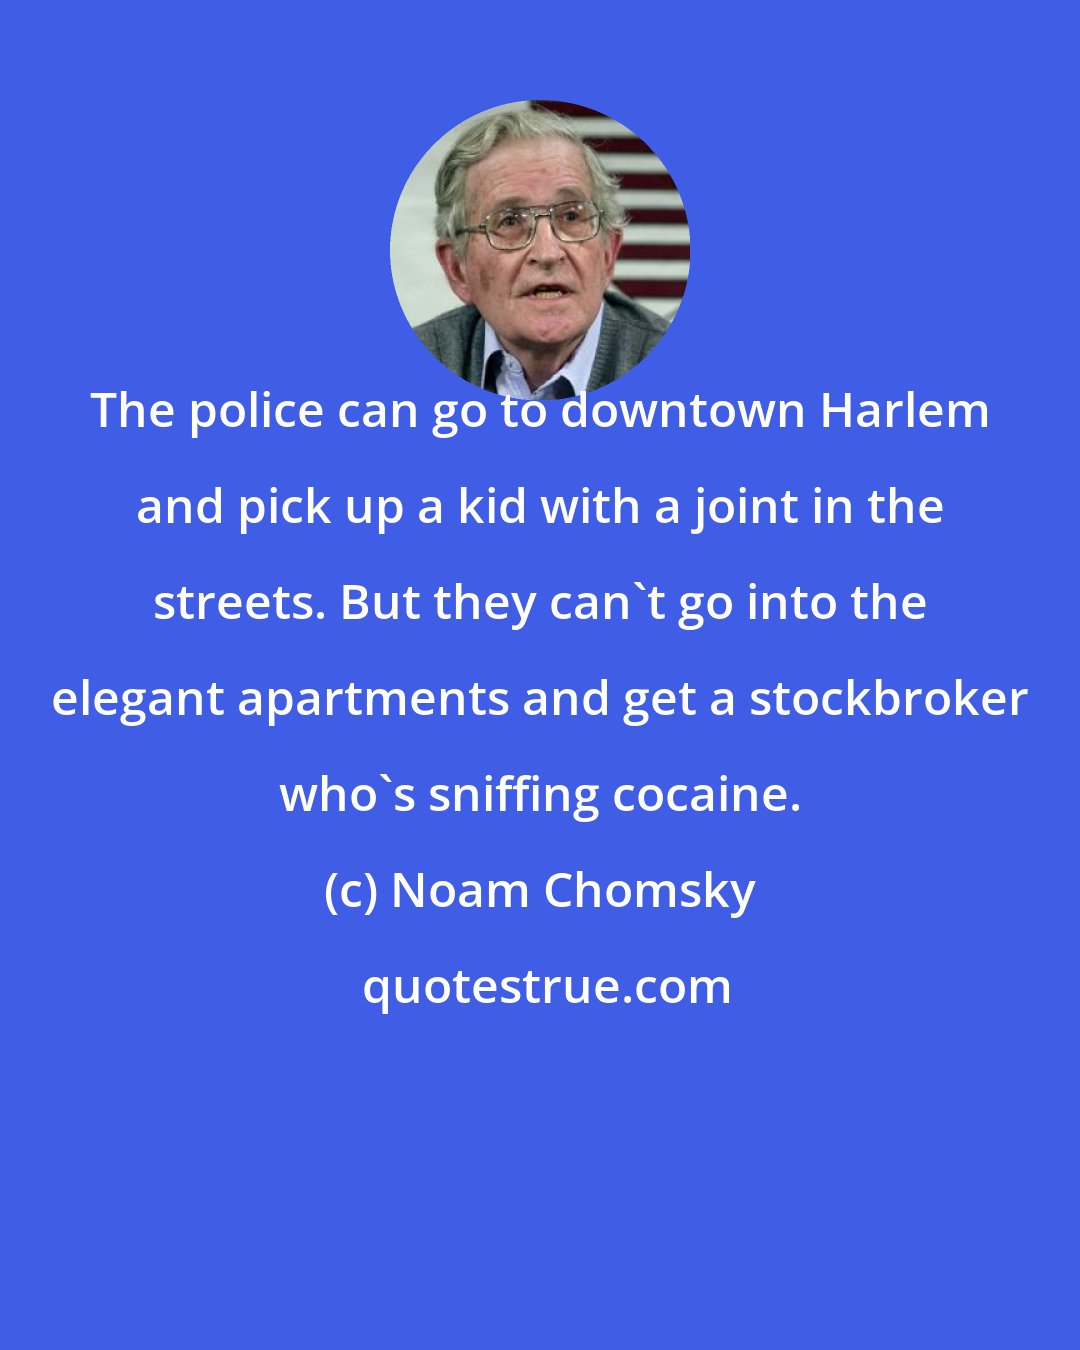 Noam Chomsky: The police can go to downtown Harlem and pick up a kid with a joint in the streets. But they can't go into the elegant apartments and get a stockbroker who's sniffing cocaine.